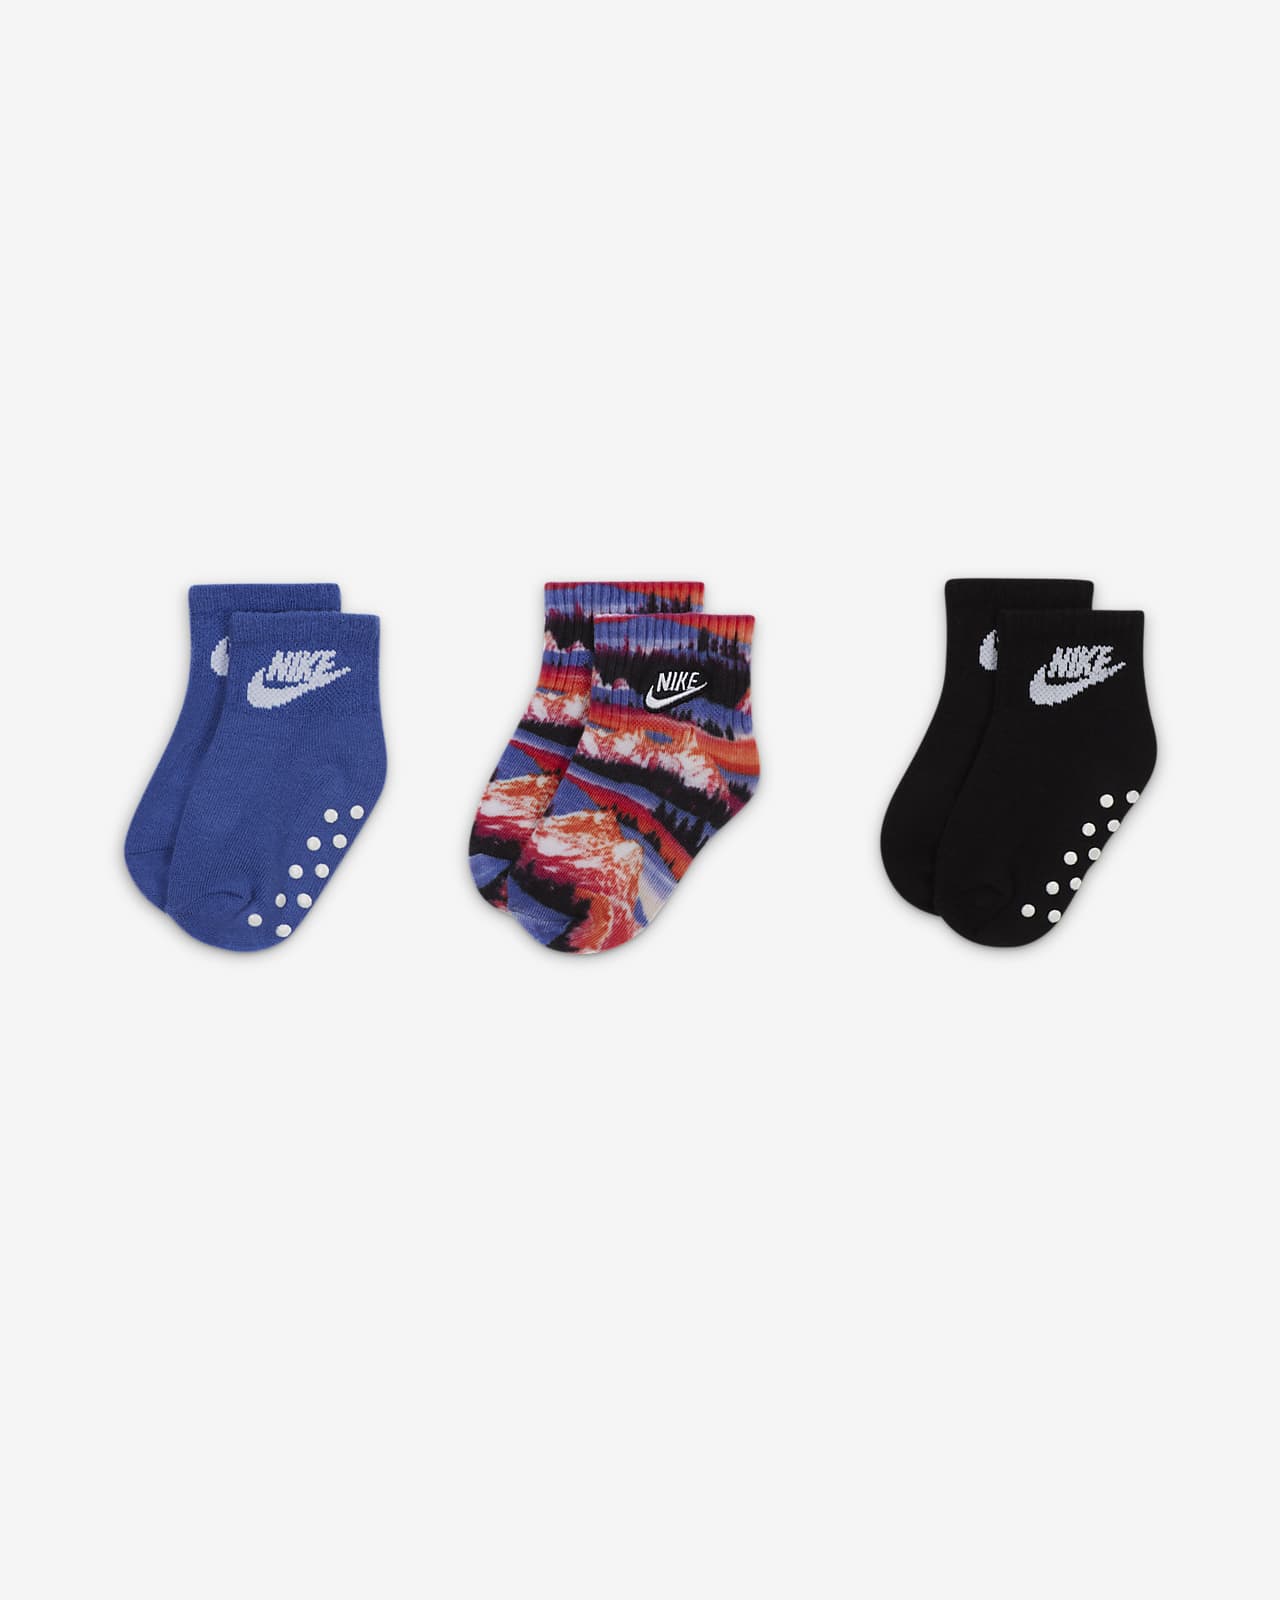 Grip Socks Calcetines Antideslizantes Mujer, 3 Pares Calcetines